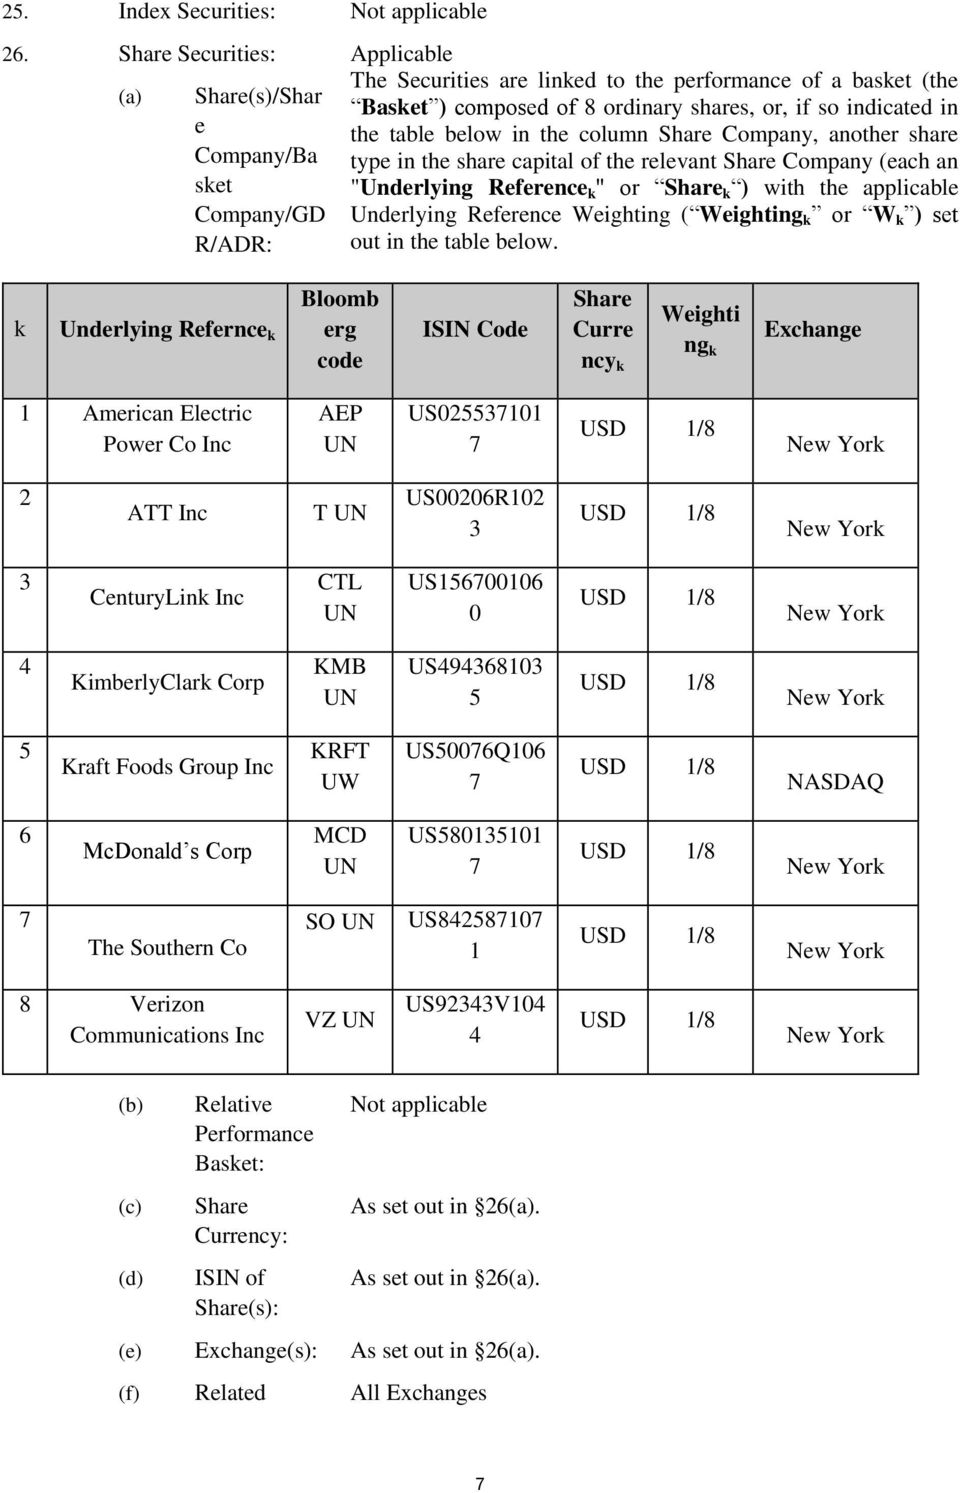 indicated in the table below in the column Share Company, another share type in the share capital of the relevant Share Company (each an "Underlying Reference k " or Share k ) with the applicable